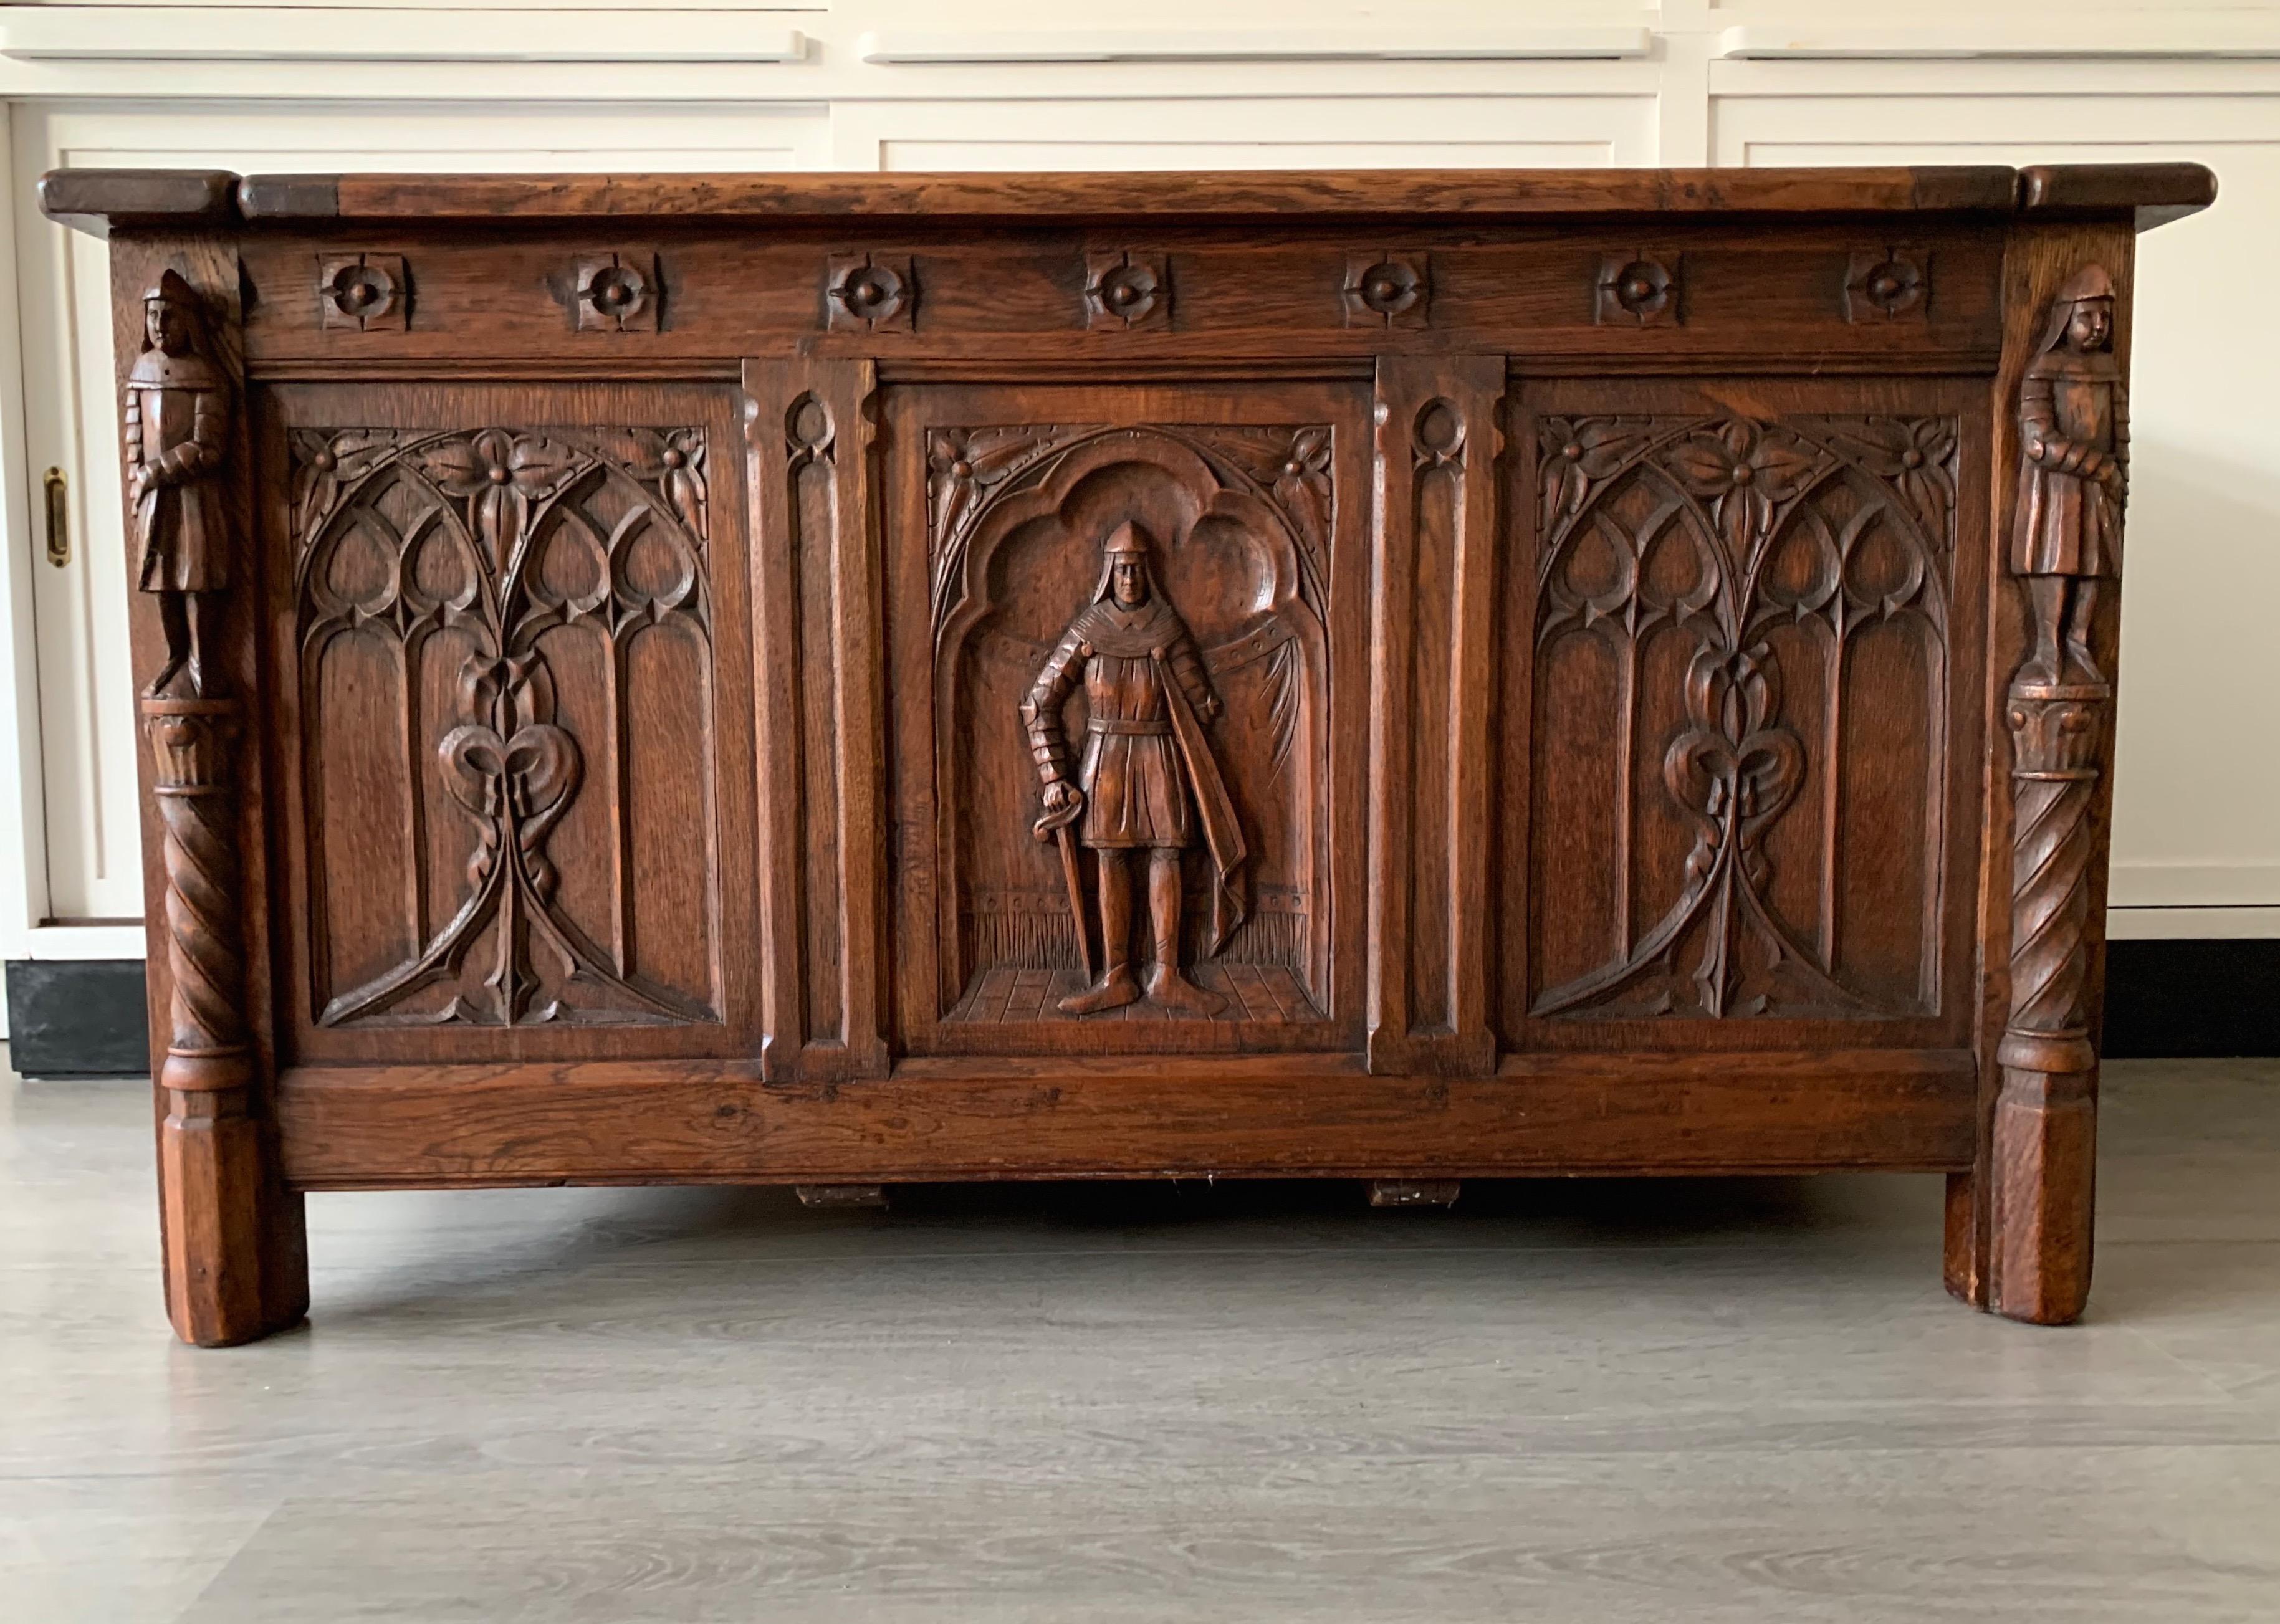 Wonderful Gothic Revival chest with an amazing presence.

If you like Gothic Revival furniture then we are certain you will like this quality carved and intricate chest. This fine and practical specimen comes with very attractive, church-window-like